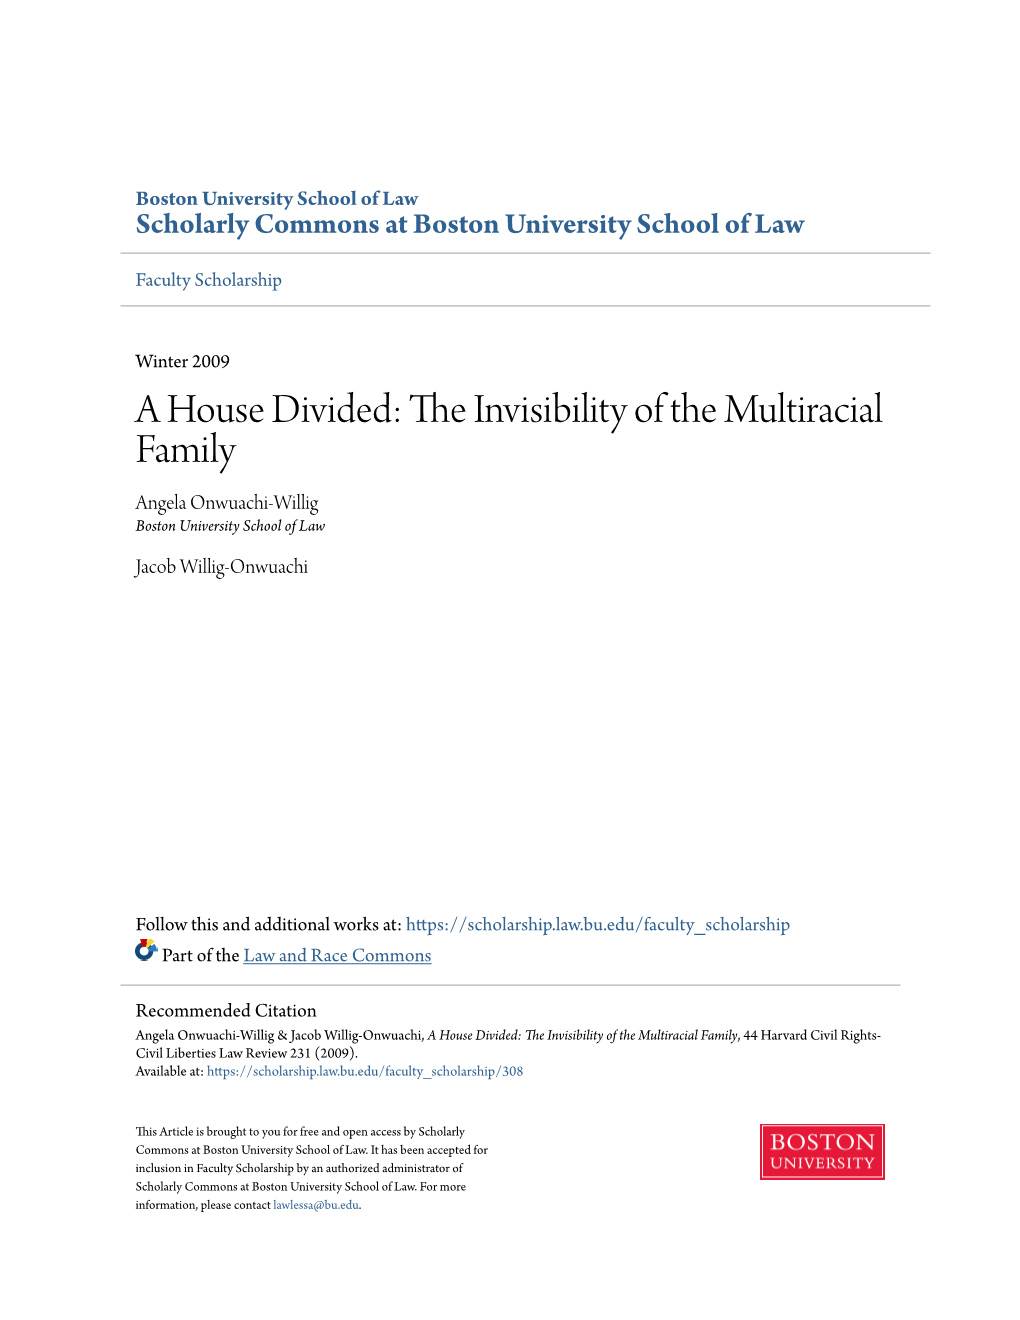 A House Divided: the Ni Visibility of the Multiracial Family Angela Onwuachi-Willig Boston University School of Law